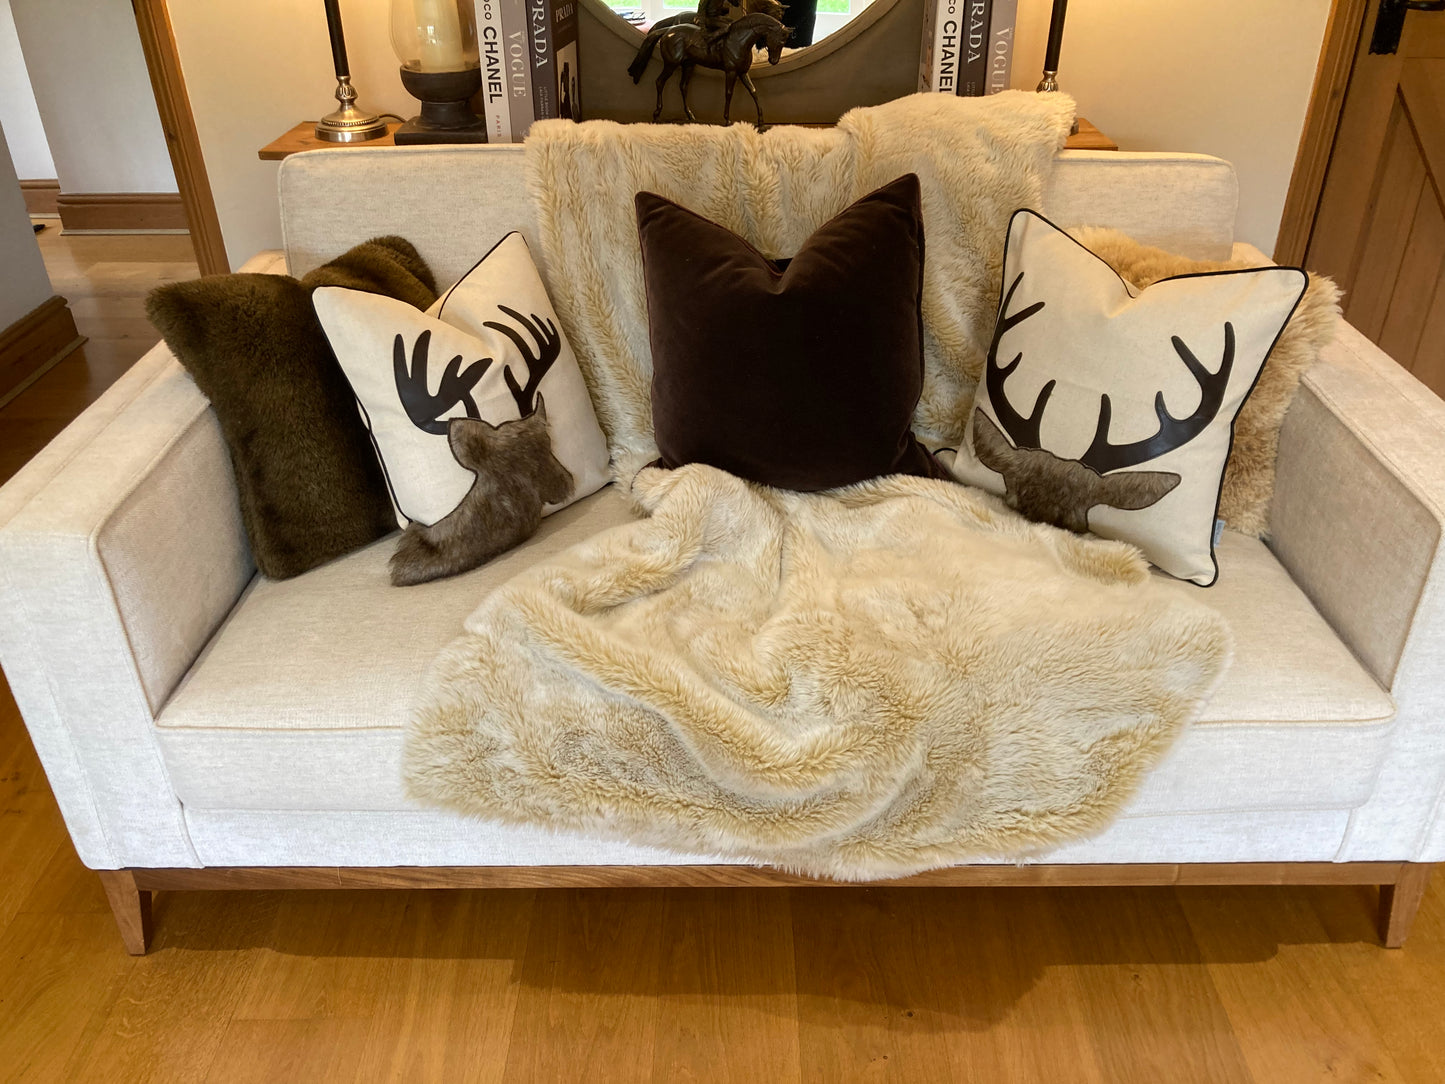 Luxury deer pillow/cushion cover linen  embroidered with fleece , next day shipping